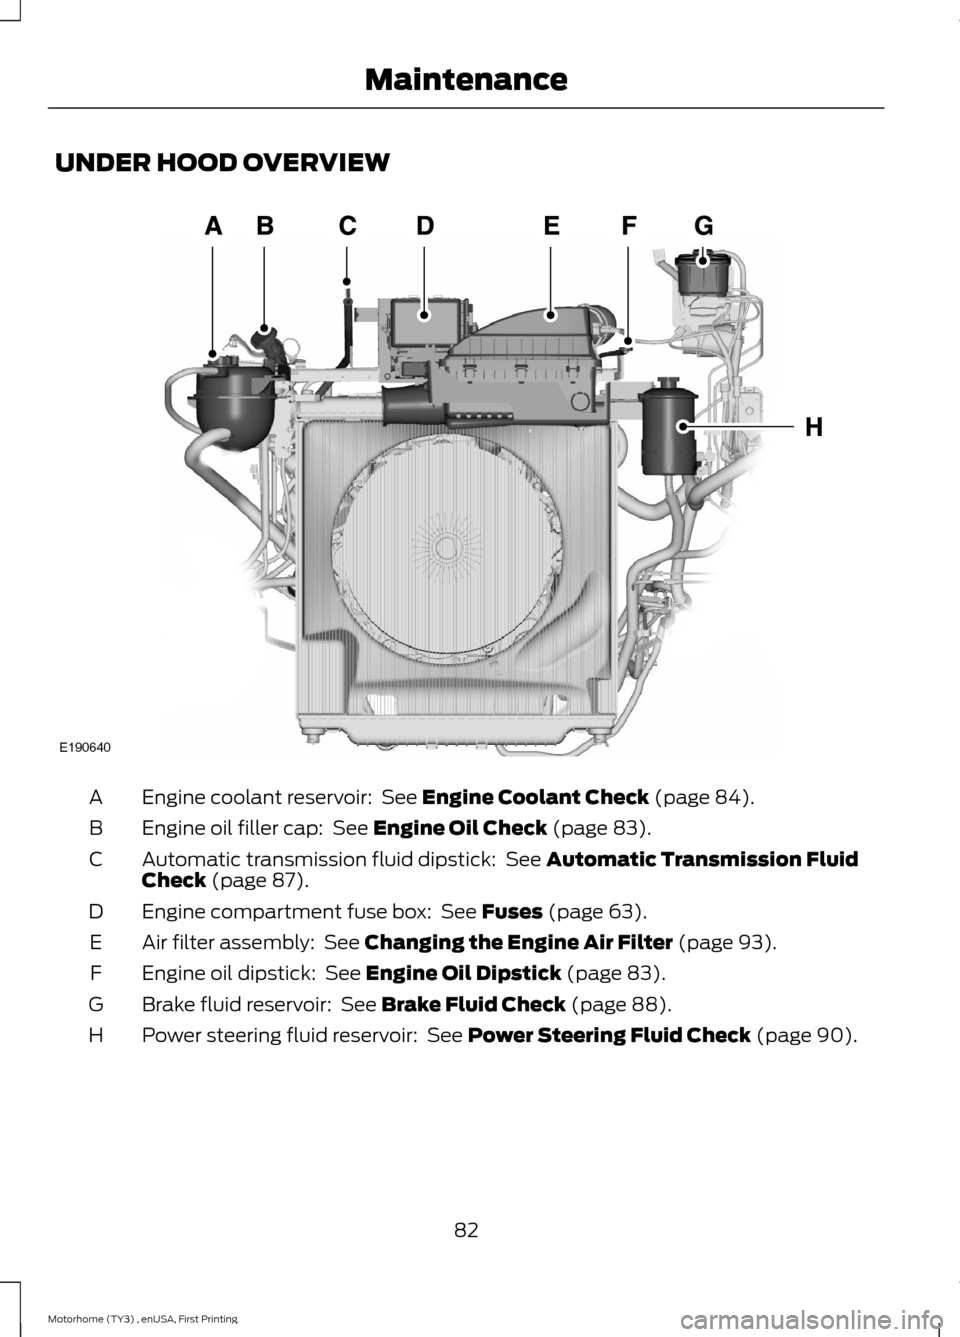 FORD F SERIES MOTORHOME AND COMMERCIAL CHASSIS 2016 13.G Owners Manual UNDER HOOD OVERVIEW
Engine coolant reservoir:  See Engine Coolant Check (page 84).A
Engine oil filler cap:  See Engine Oil Check (page 83).B
Automatic transmission fluid dipstick:  See Automatic Trans